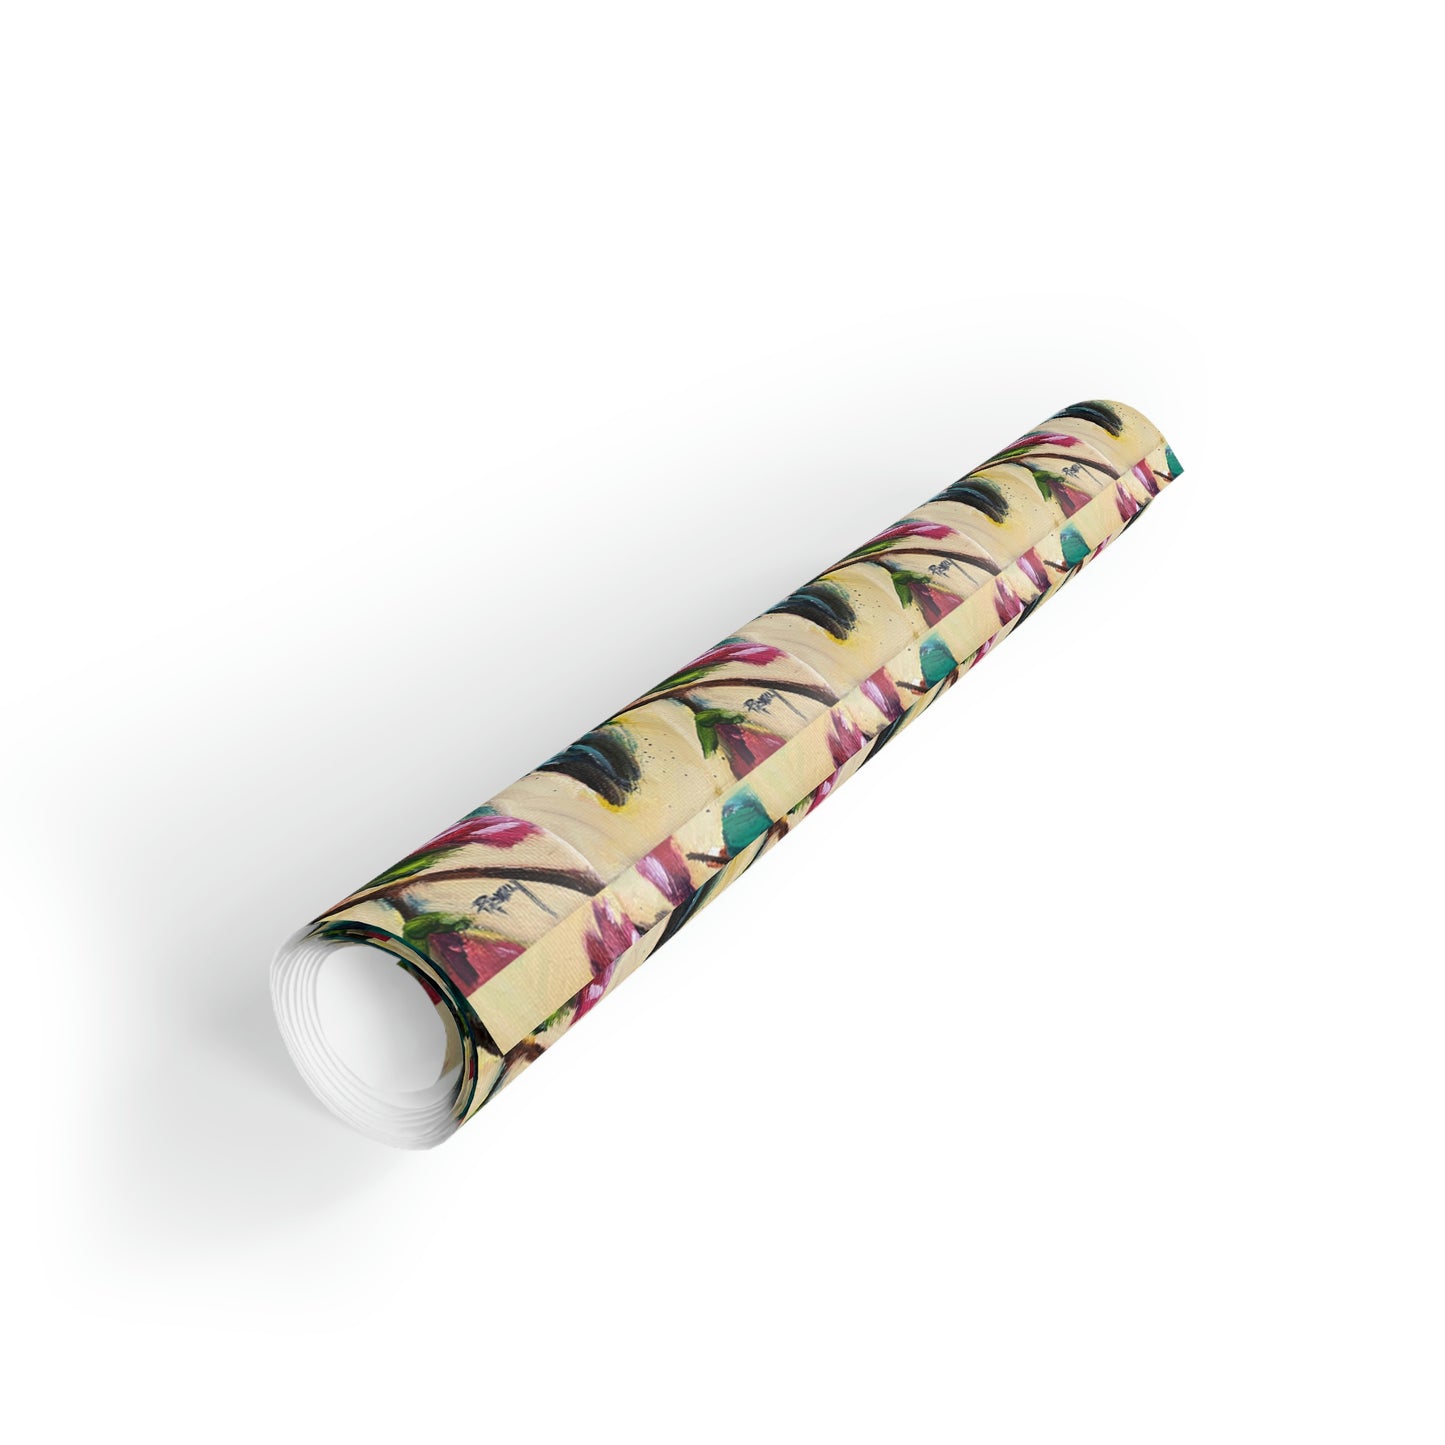 Hummingbird on a Rose Bush printed Gift Wrapping Paper Rolls, 1pc